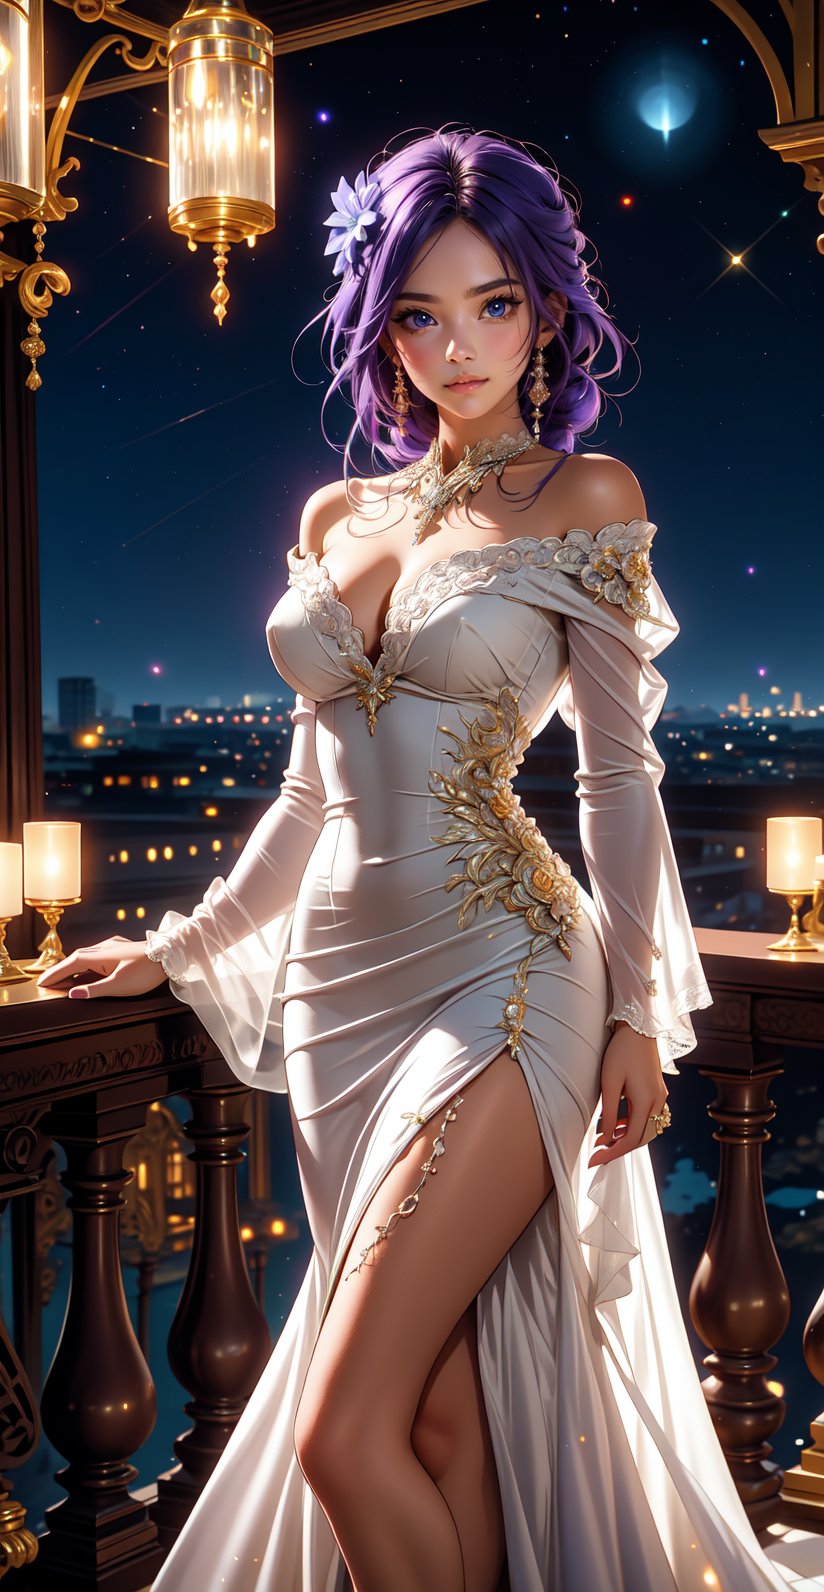 (Alone:1.4)), ((Solo:1.4)), cowboy_shot, realistic, masterpiece,best quality,High definition, (realistic lighting, sharp focus), high resolution,volumetric light, outdoors. A glamorous 25-year-old woman stands on a balcony, her vibrant purple hair intricately braided, cascading gracefully over her shoulder. She poses with a tender smile and warm, inviting eyes, gazing at the stars that sprinkle the night sky. She is dressed in a stunning white gown adorned with beautiful lace details, the delicate patterns enhancing her elegance. The dress flows elegantly down to the floor, with intricate lacework at the sleeves and neckline, adding a touch of timeless charm. The balcony belongs to an elegant, opulent estate, with ornate railings and lush, cascading plants that frame her figure. Soft, ambient lighting from crystal chandeliers inside the grand hall spills out onto the balcony, casting a gentle glow. The woman exudes both sophistication and serenity, creating a mesmerizing scene of beauty and grace.,raiden_shogun_genshin, braided hair